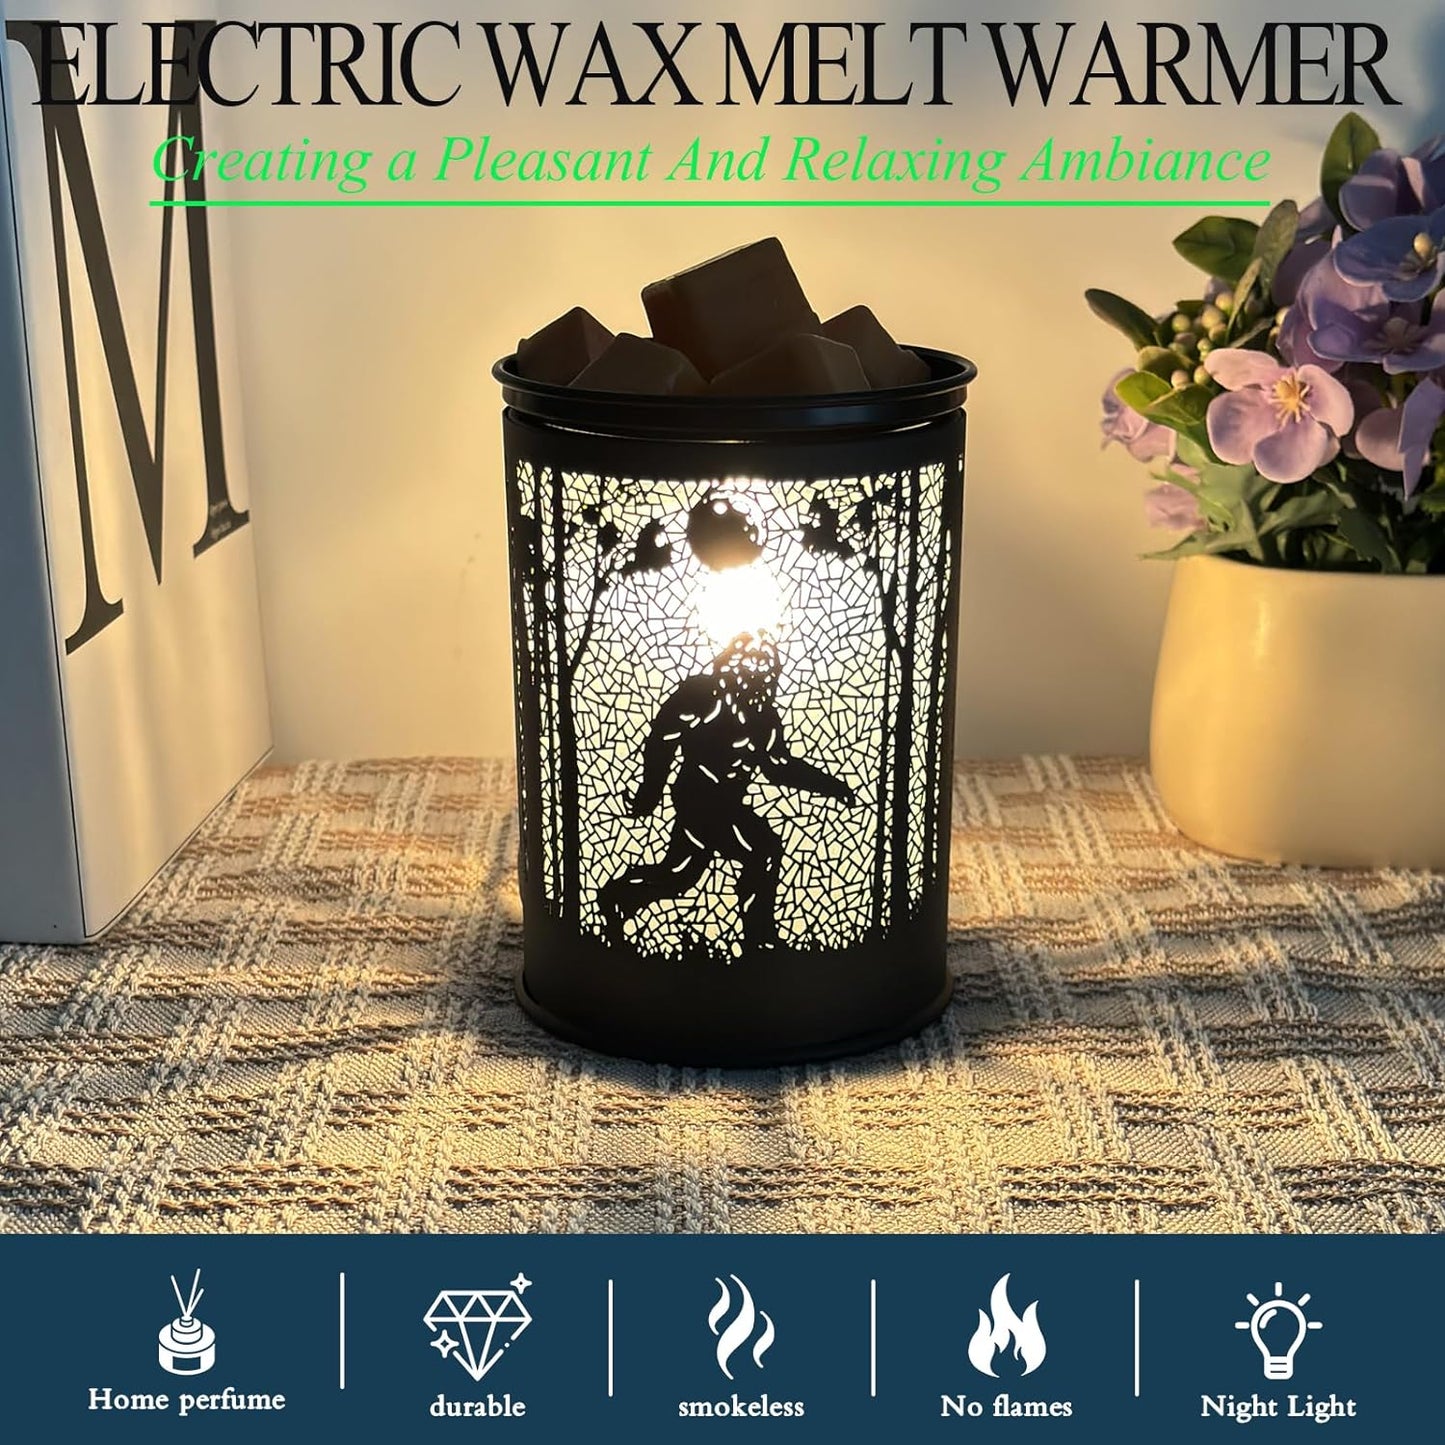 Metal Wax Warmer Electric,Wax melt Warmer,Candle Wax Burner, Candle Warmer,Candle Melter,for Home Office Décor and Gifts for Holiday（Bigfoot/Mythological Animal）…